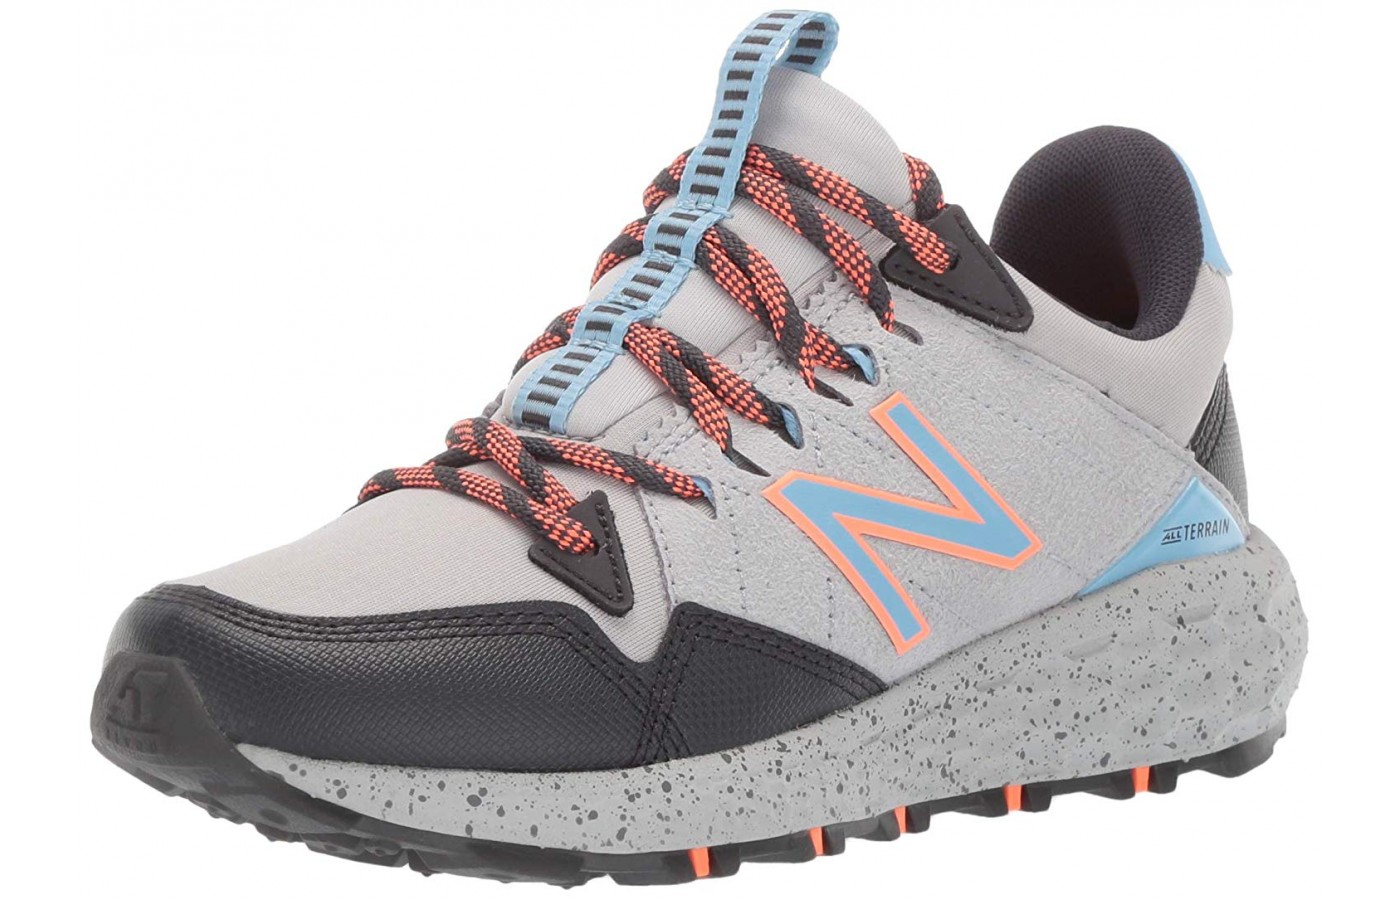 New Balance Crag V1 Reviewed \u0026 Rated in 